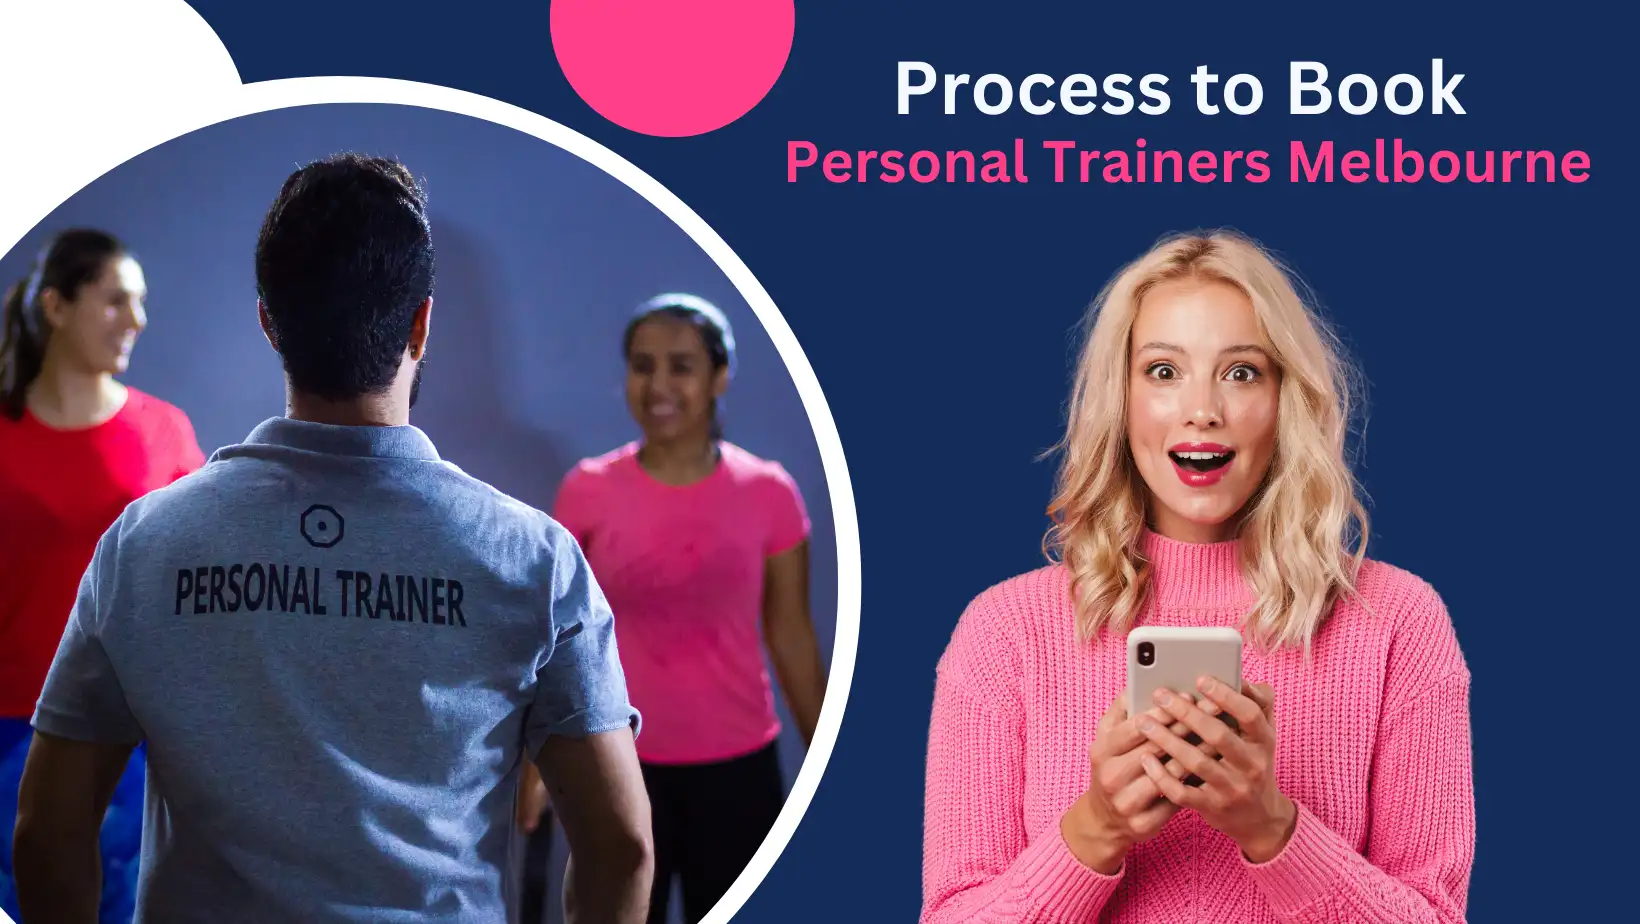 Understand the Process to Book Personal Trainers in Melbourne